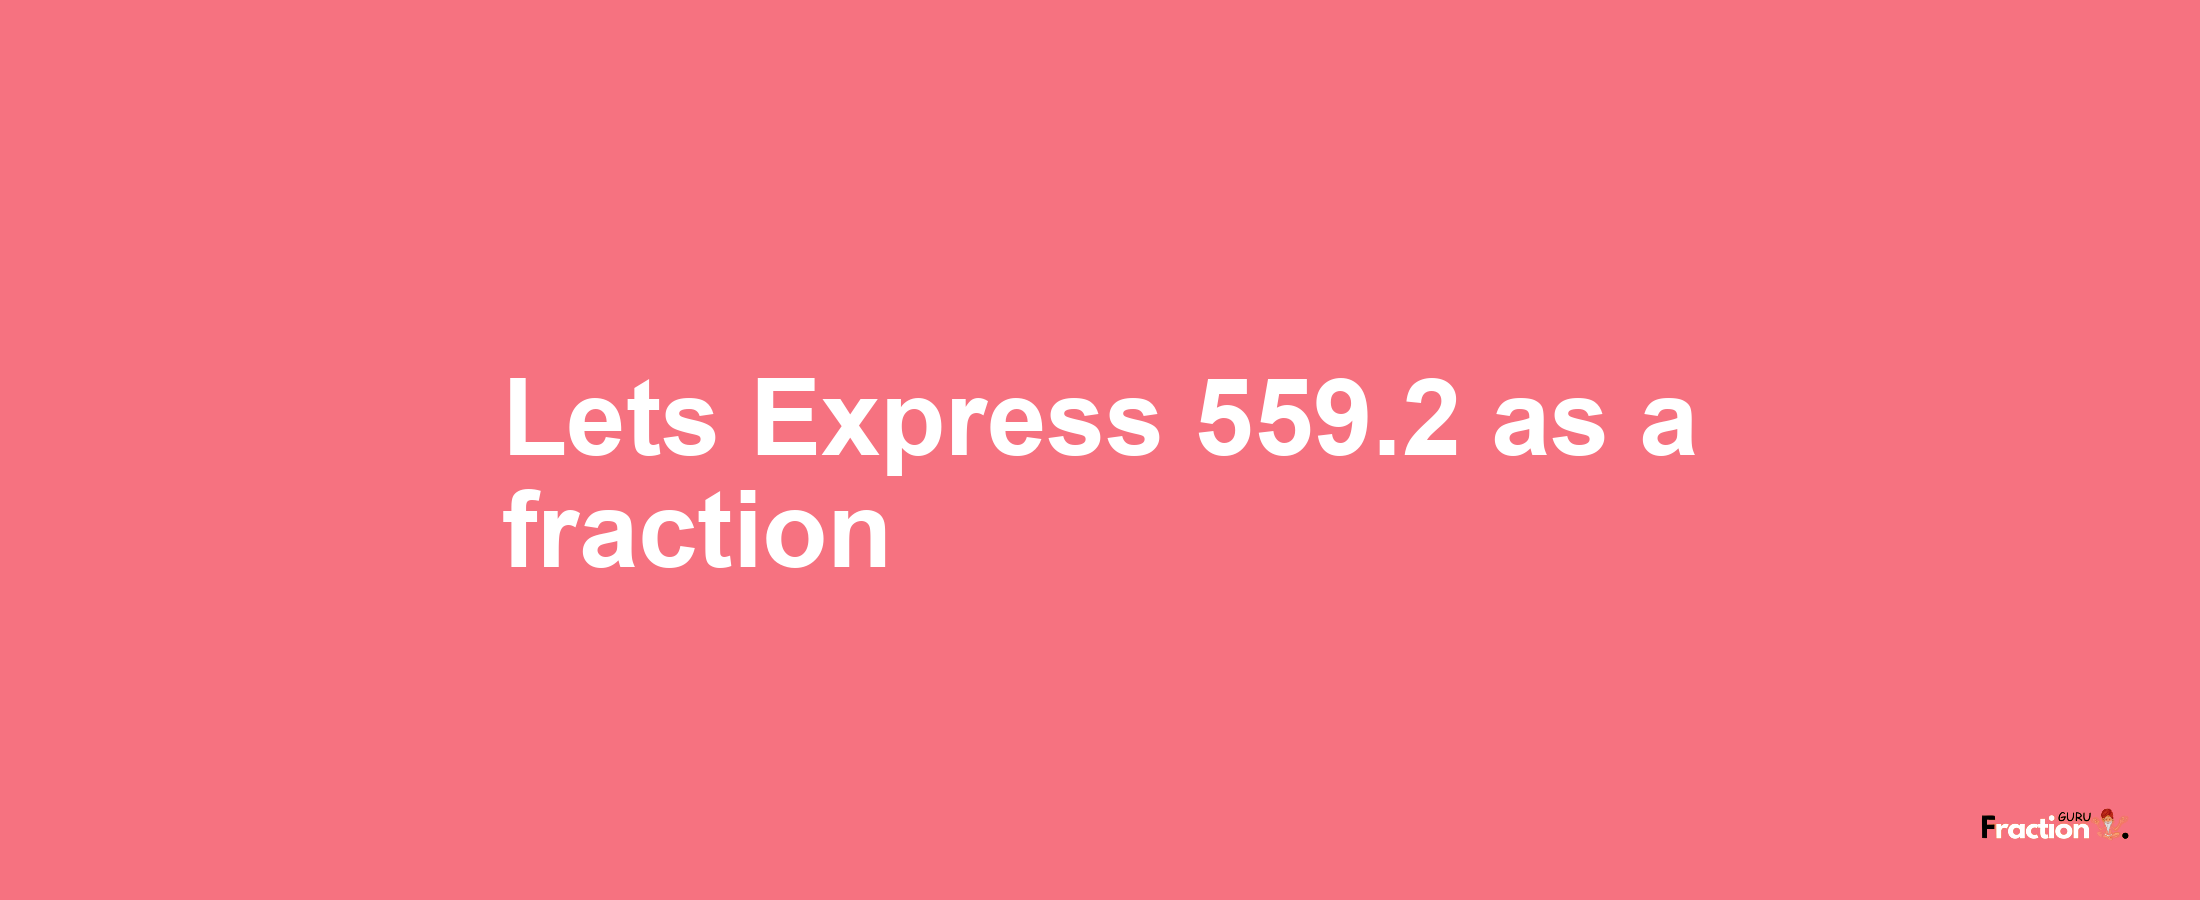 Lets Express 559.2 as afraction